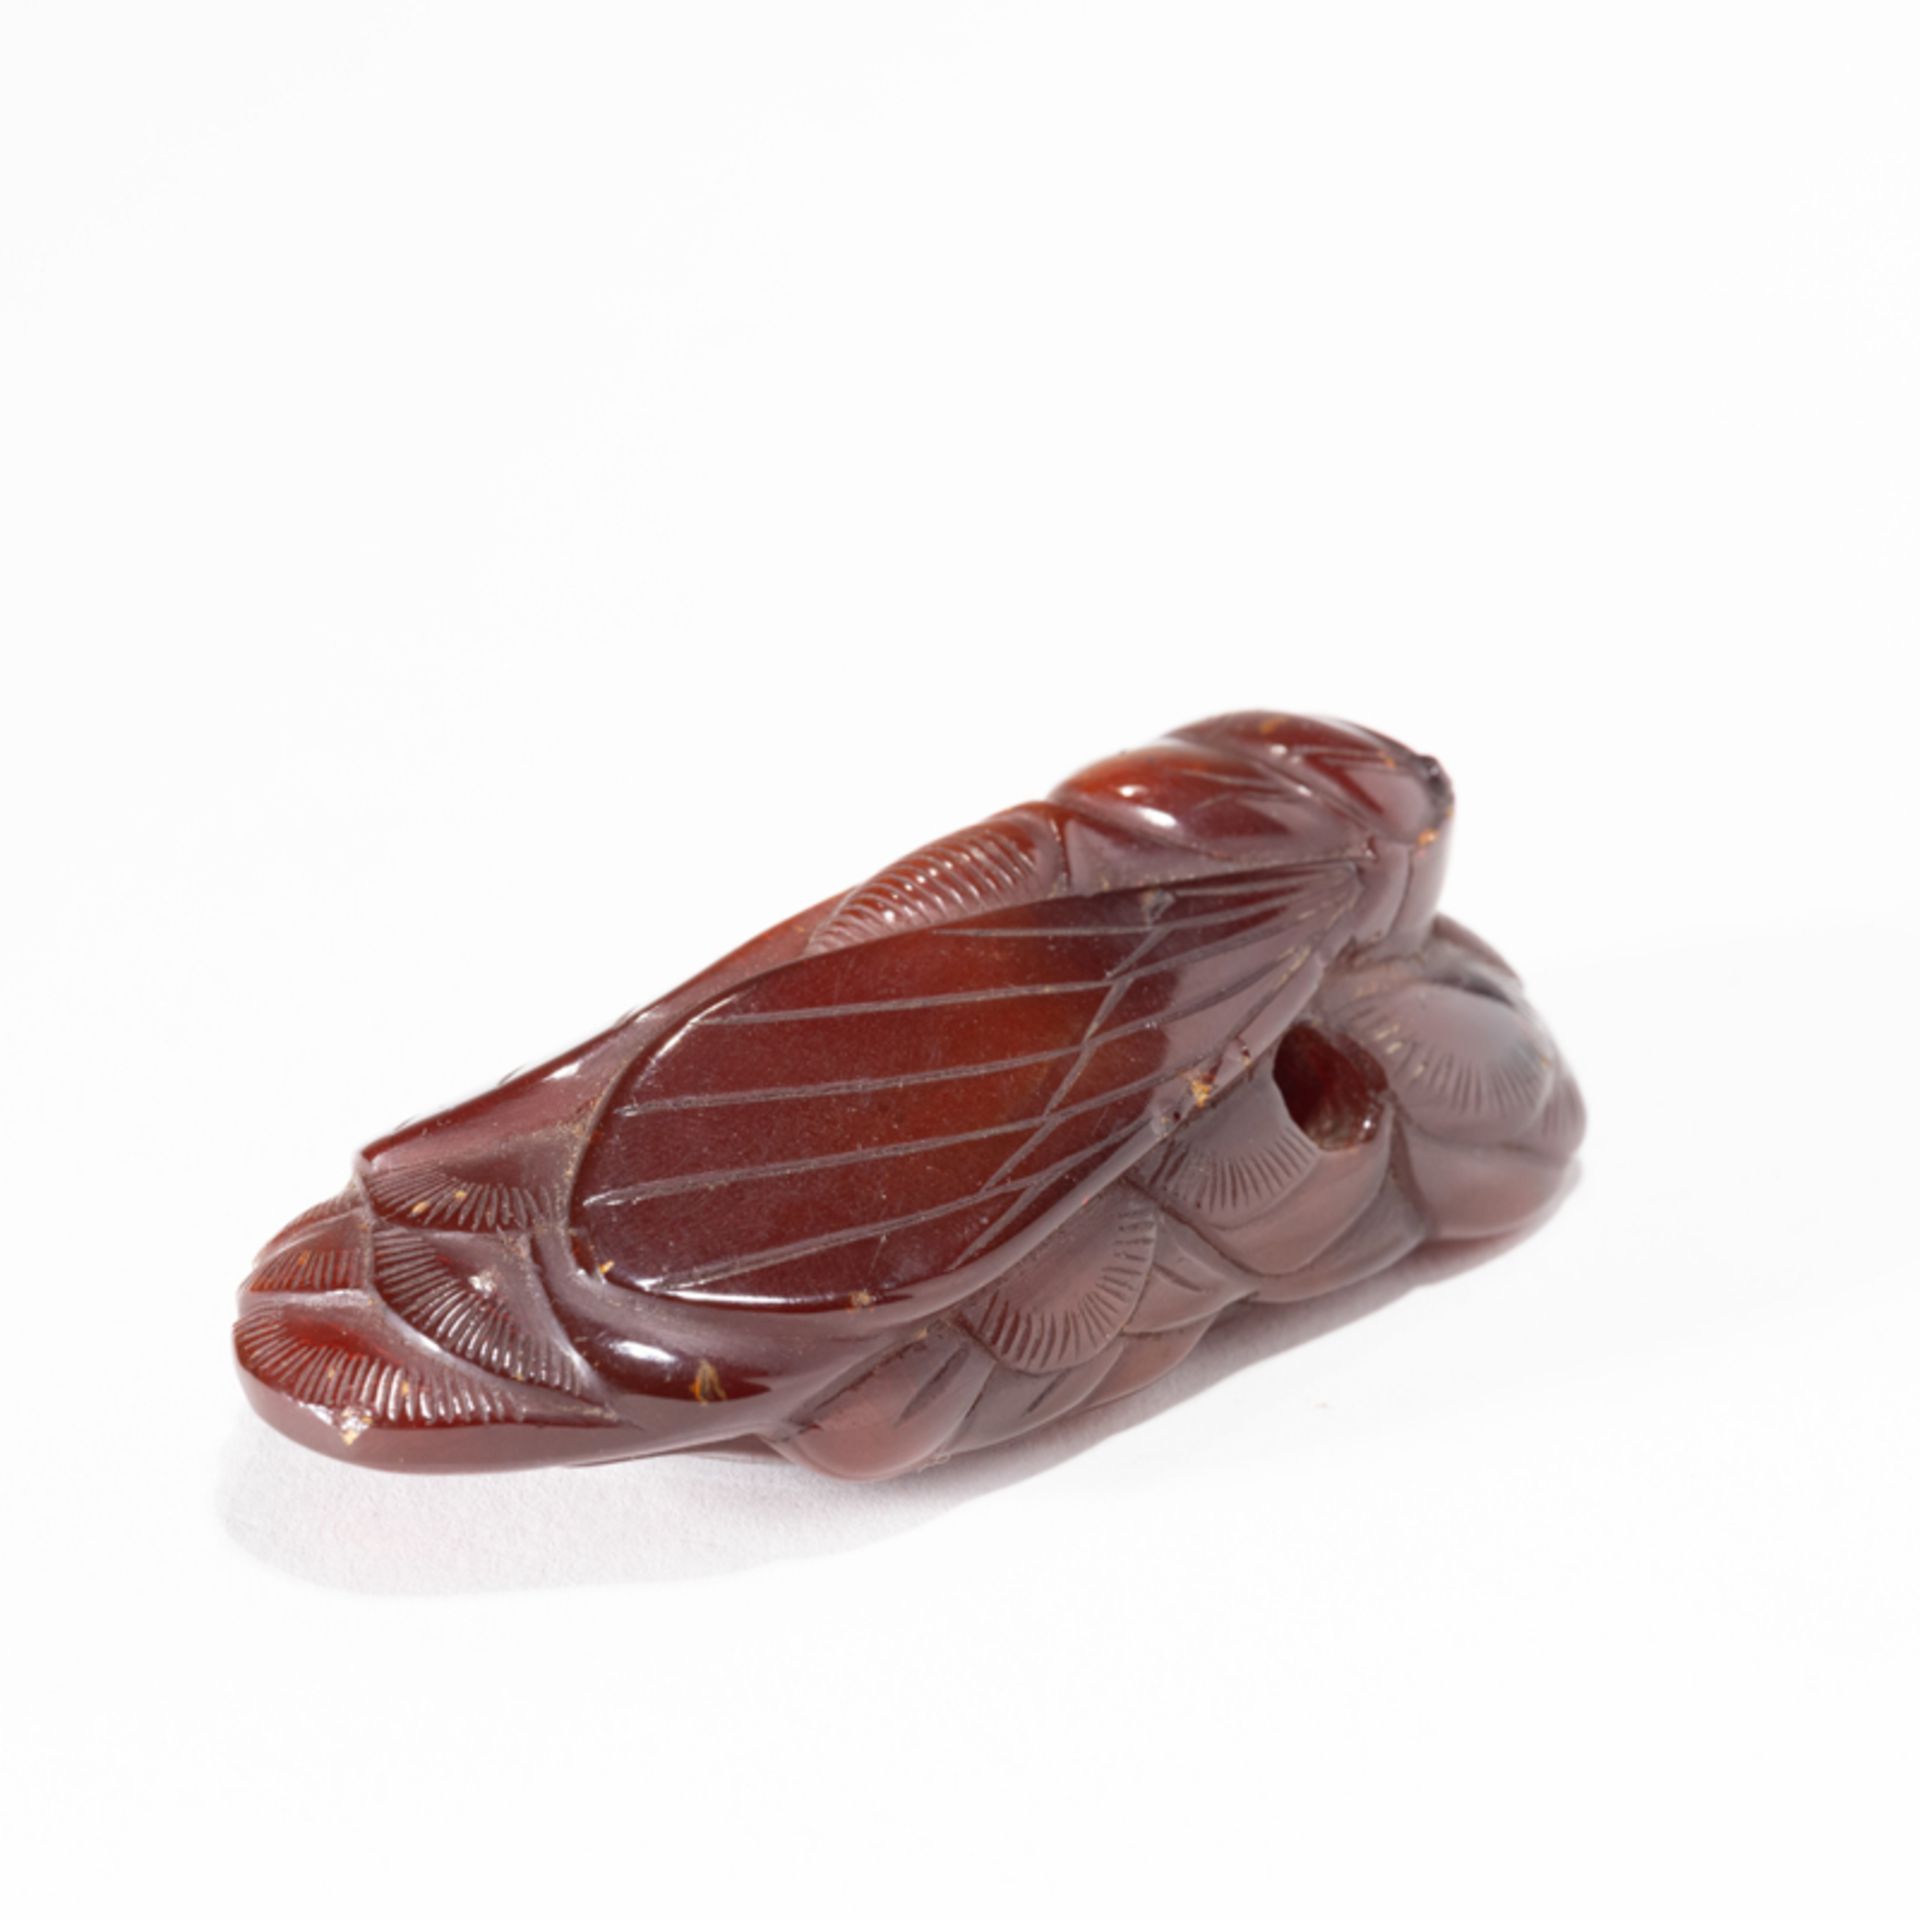 A CHINESE AMBER CICADA-FORM ORNAMENT - Image 2 of 8